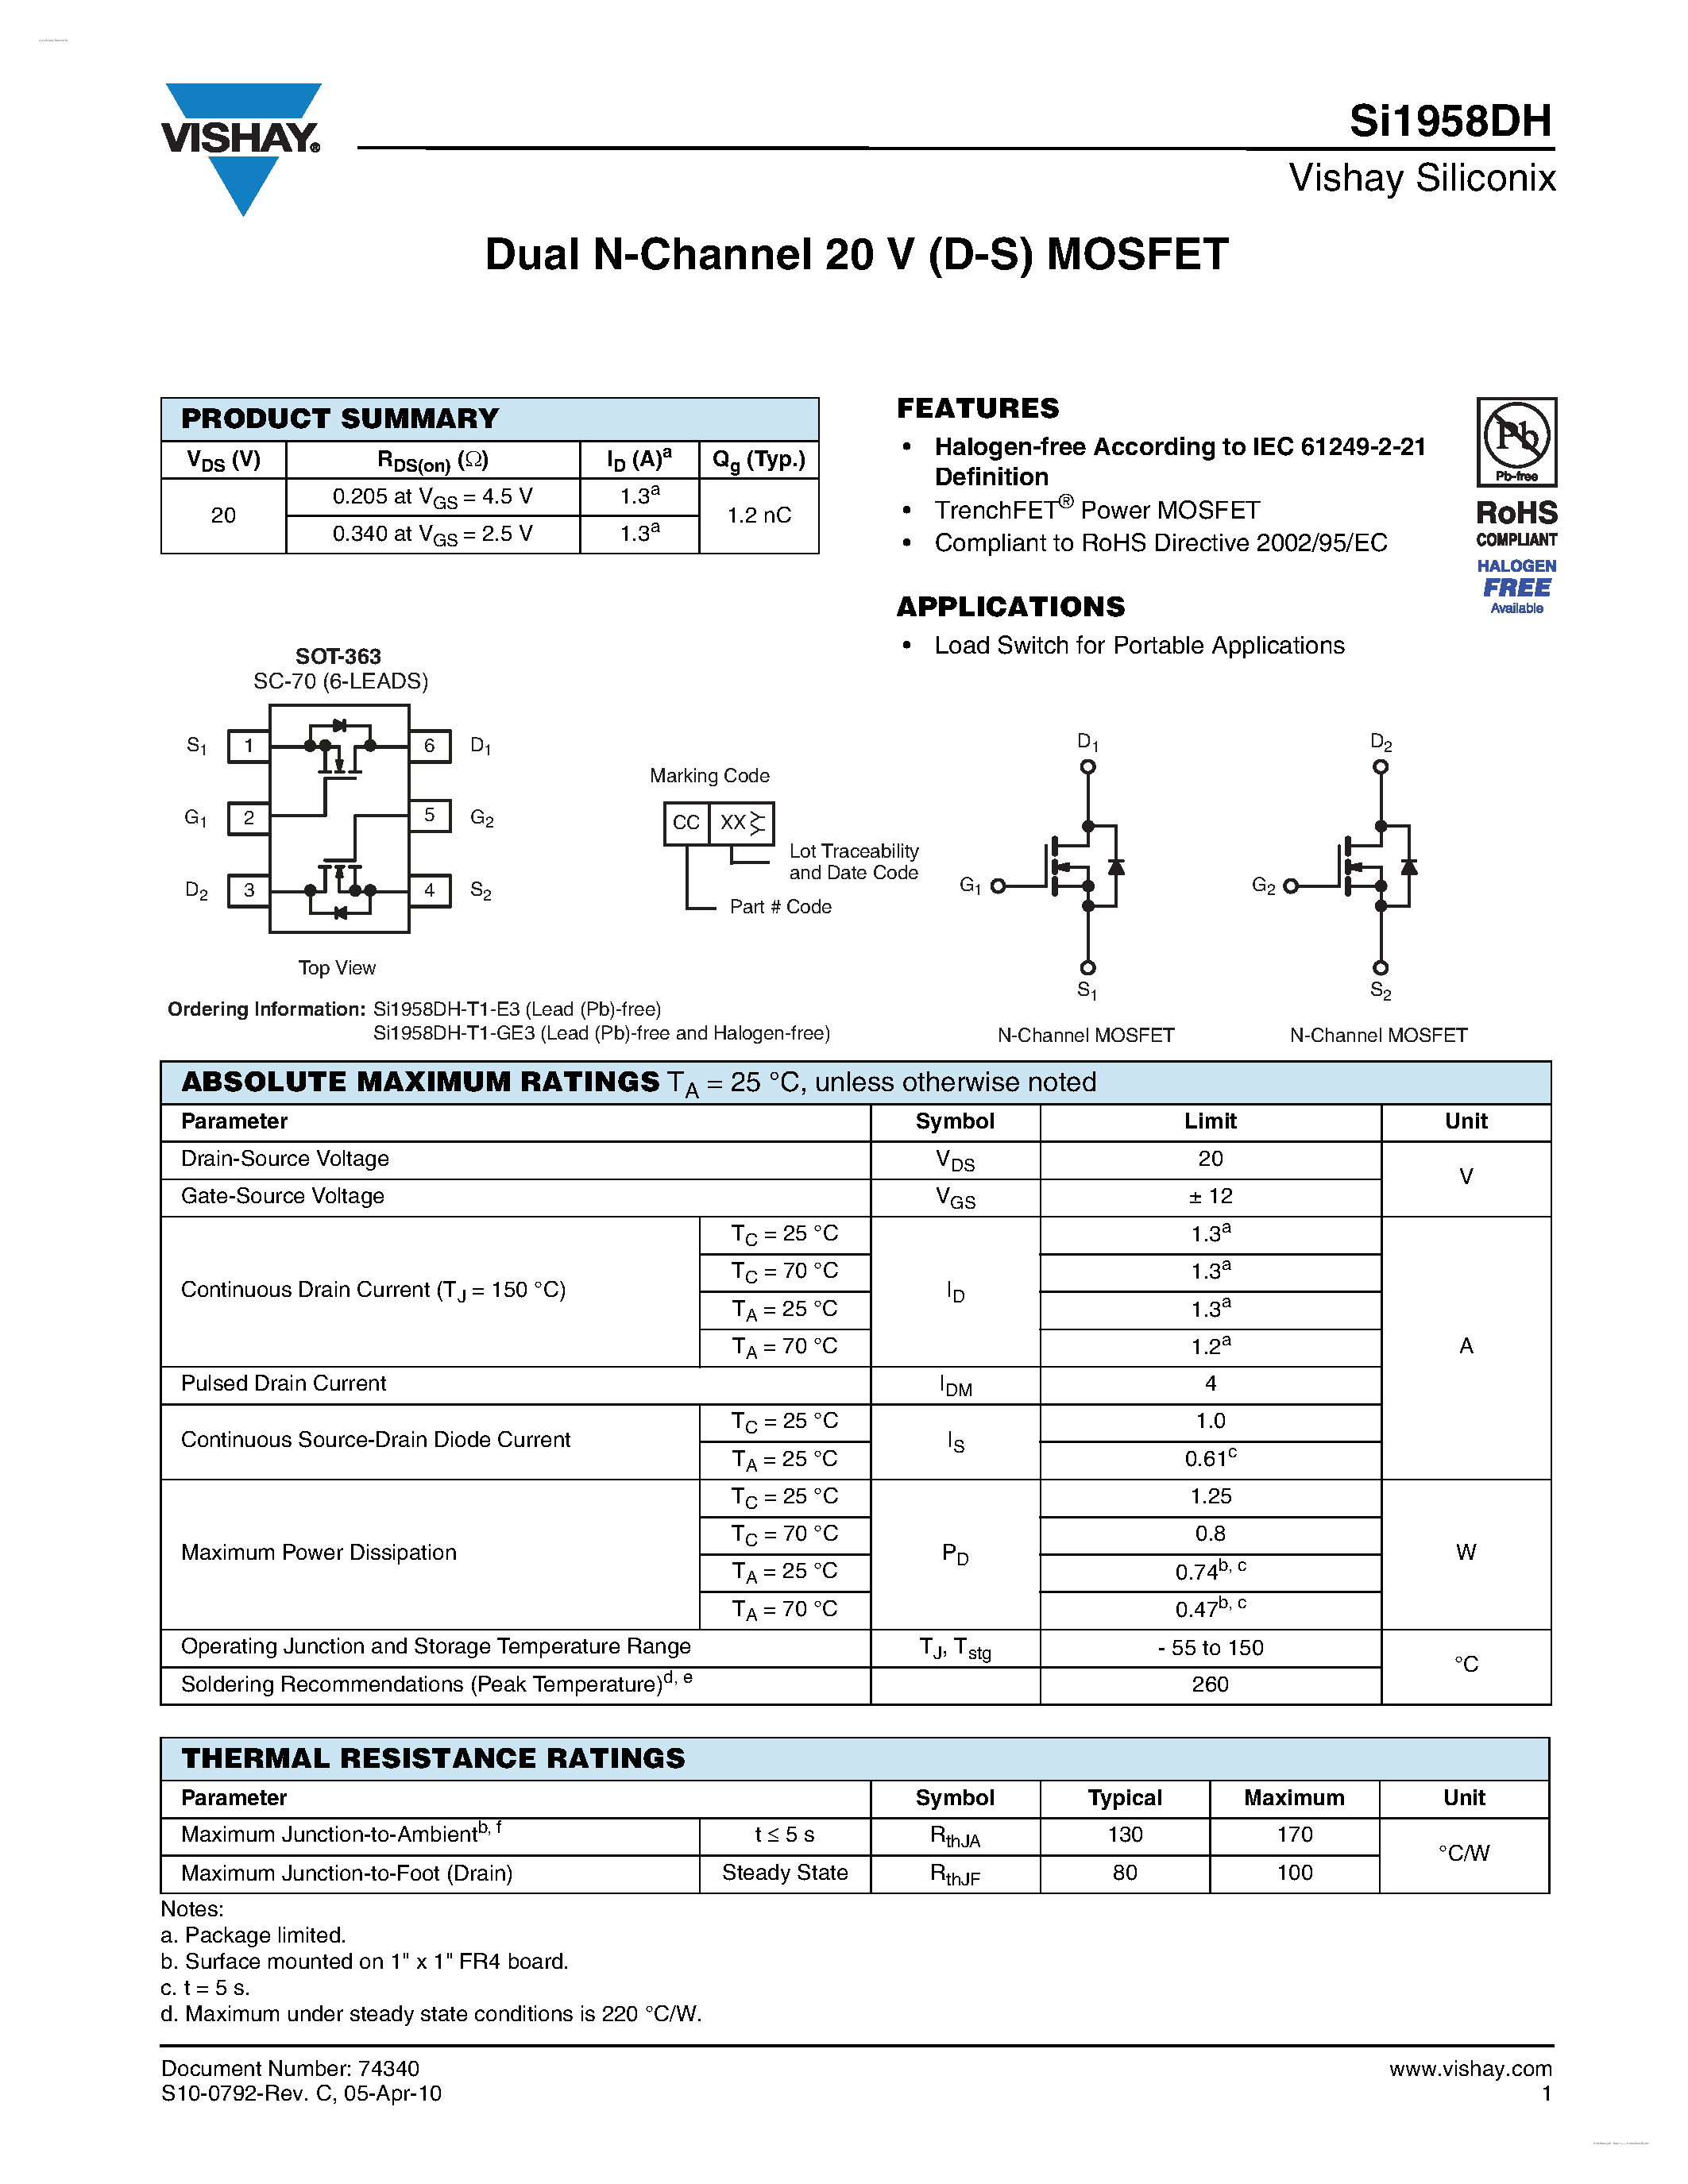 Datasheet SI1958DH - Dual N-Channel 20 V (D-S) MOSFET page 1